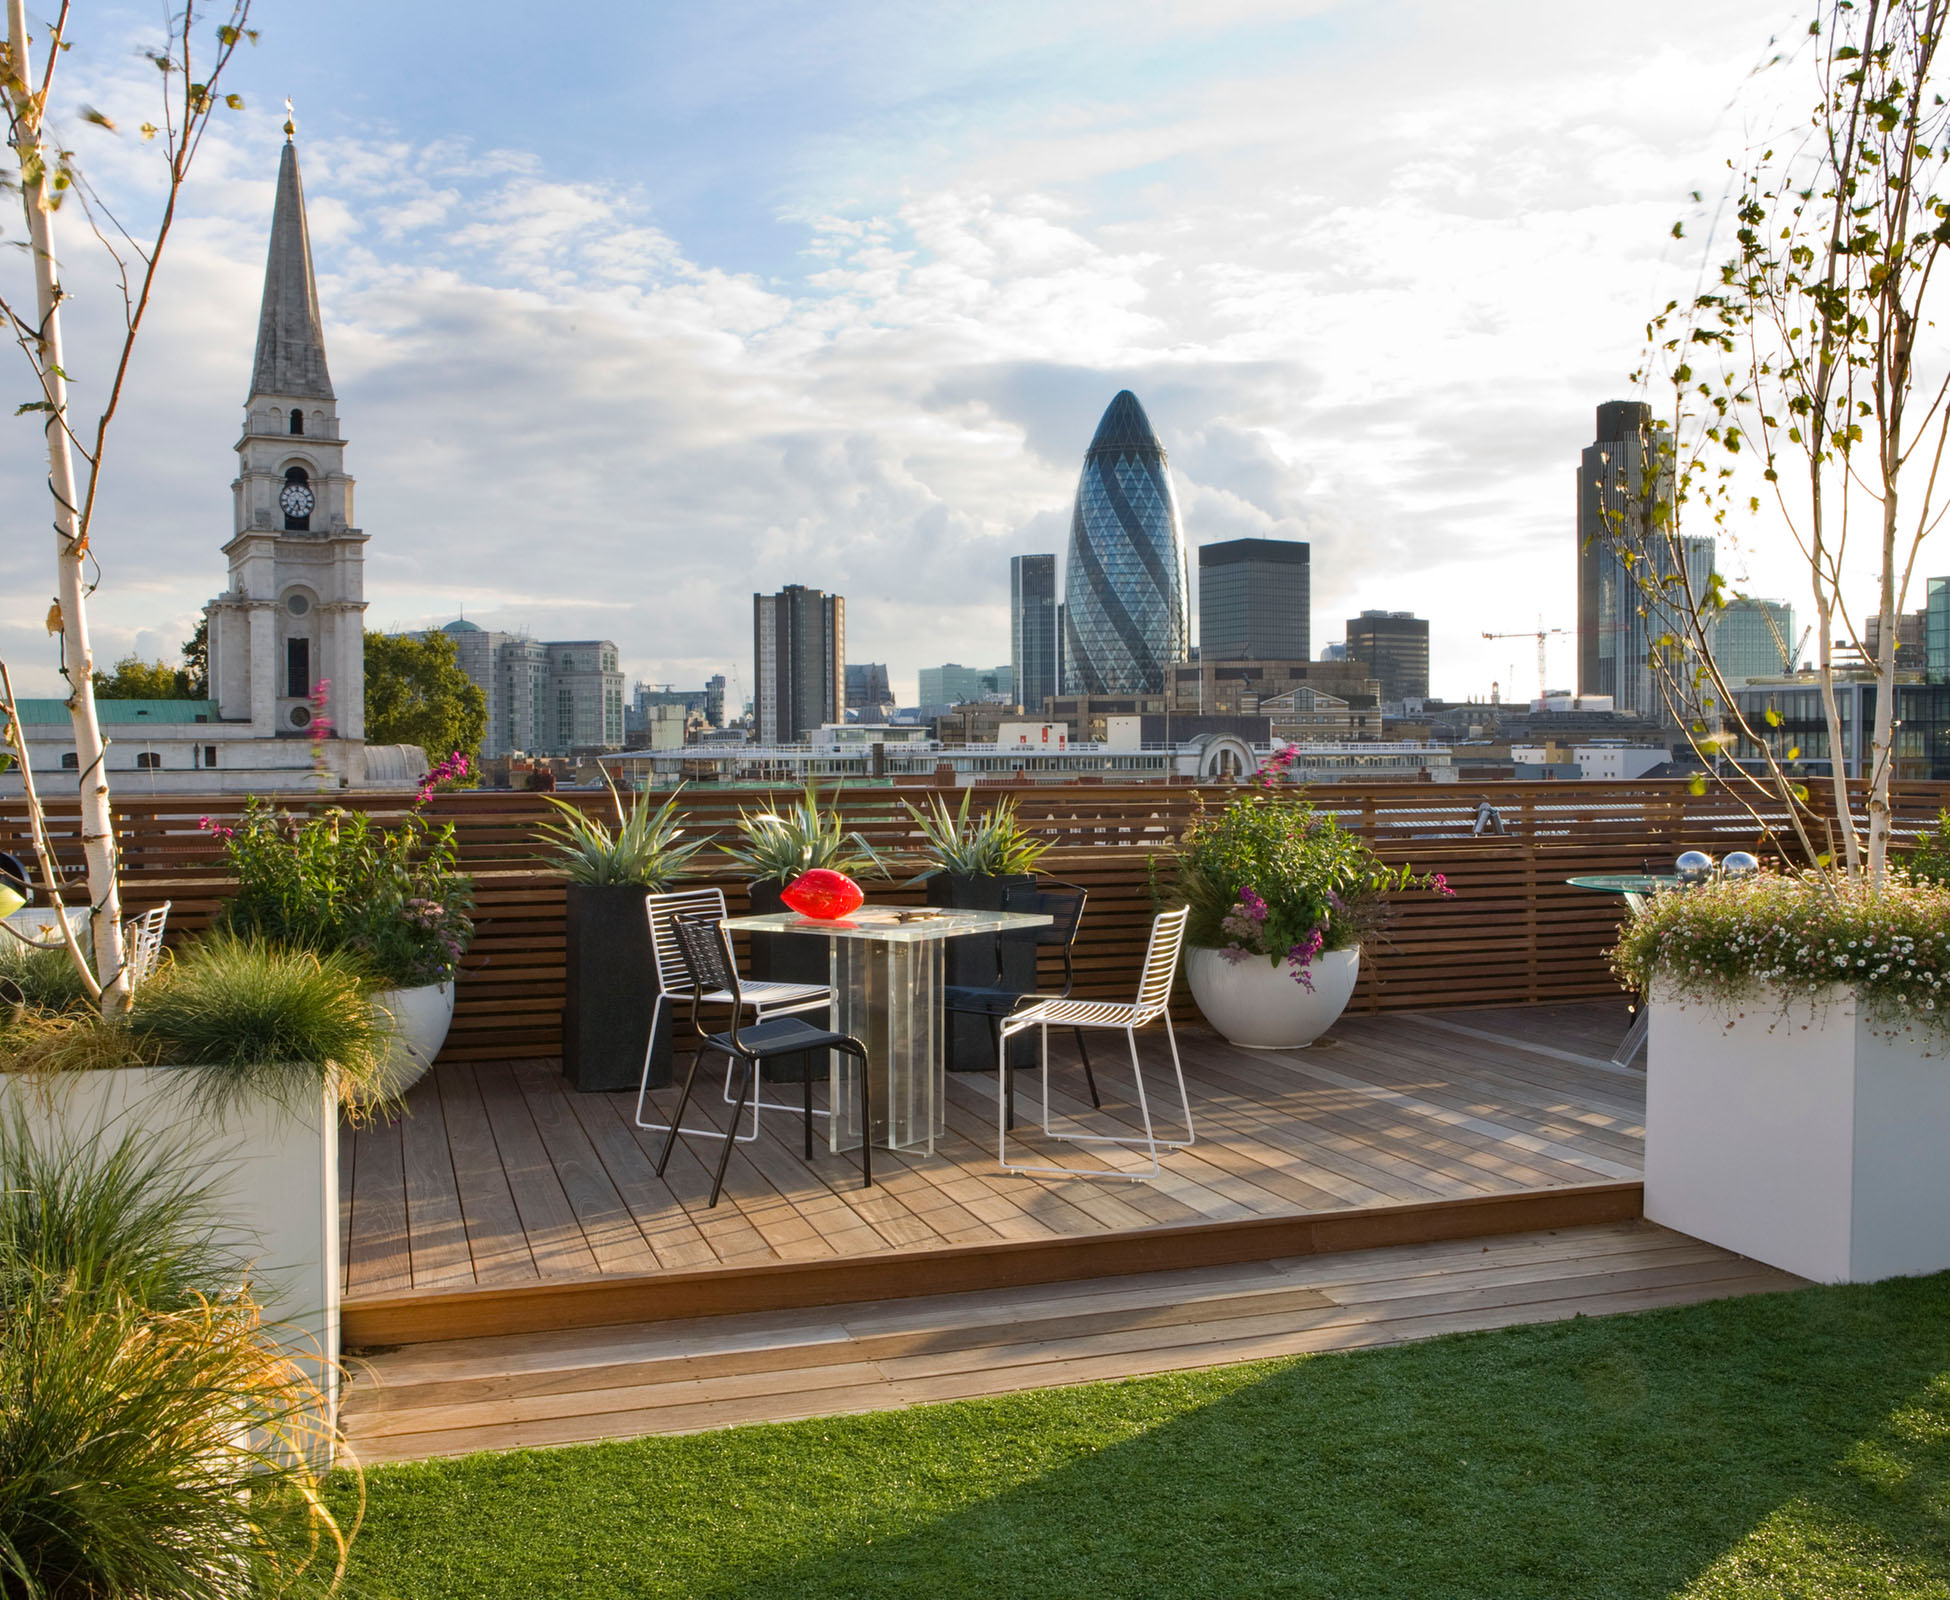 View of London’s skyline and famous city landmarks from this rooftop terrace in the heart of Shoreditch.